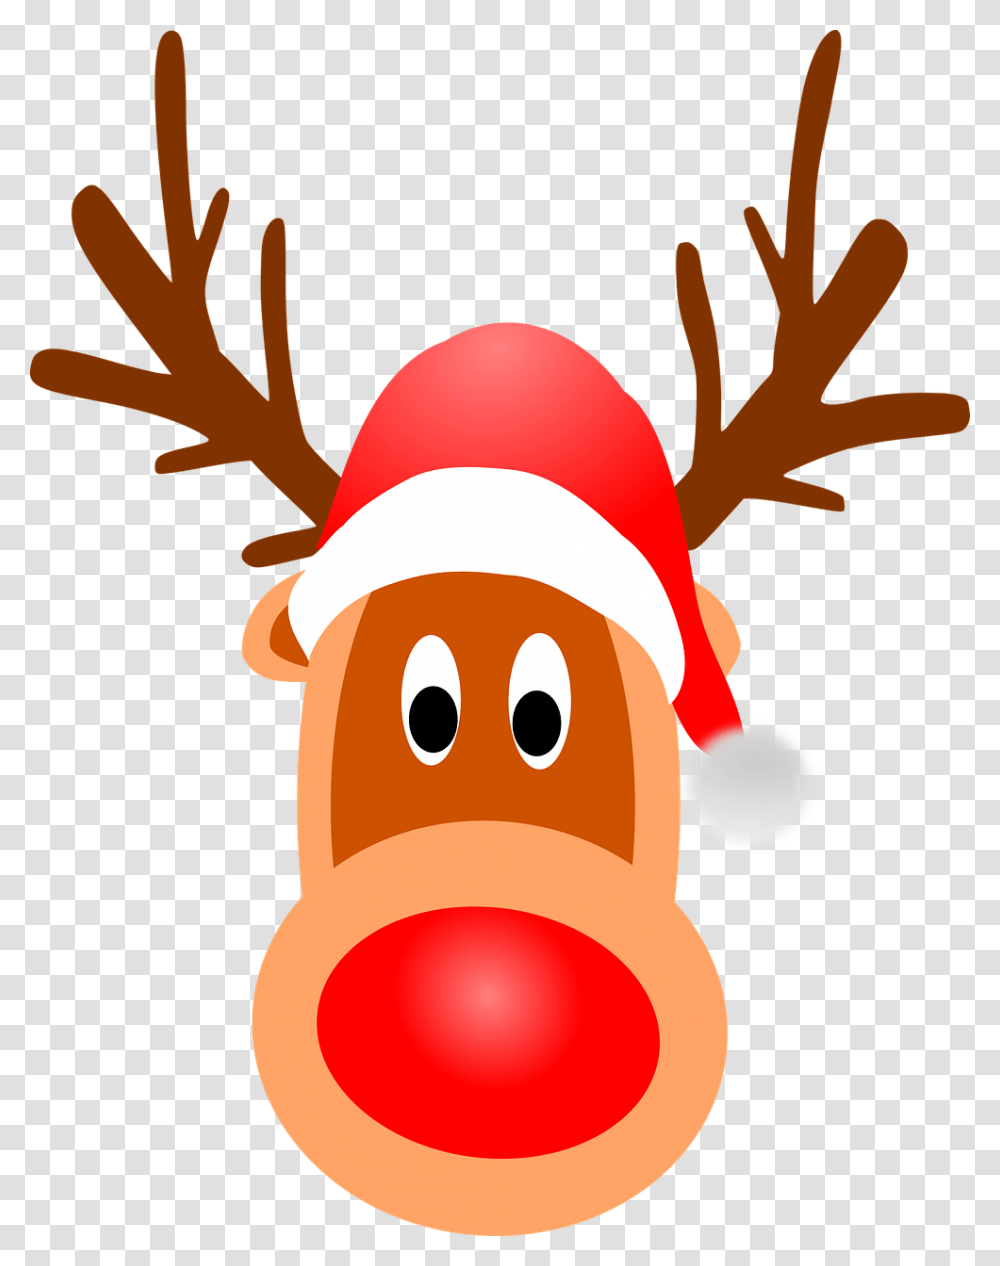 Reindeer Antlers Headband Candy Cane Reindeer, Food, Toy, Plant, Snowman Transparent Png